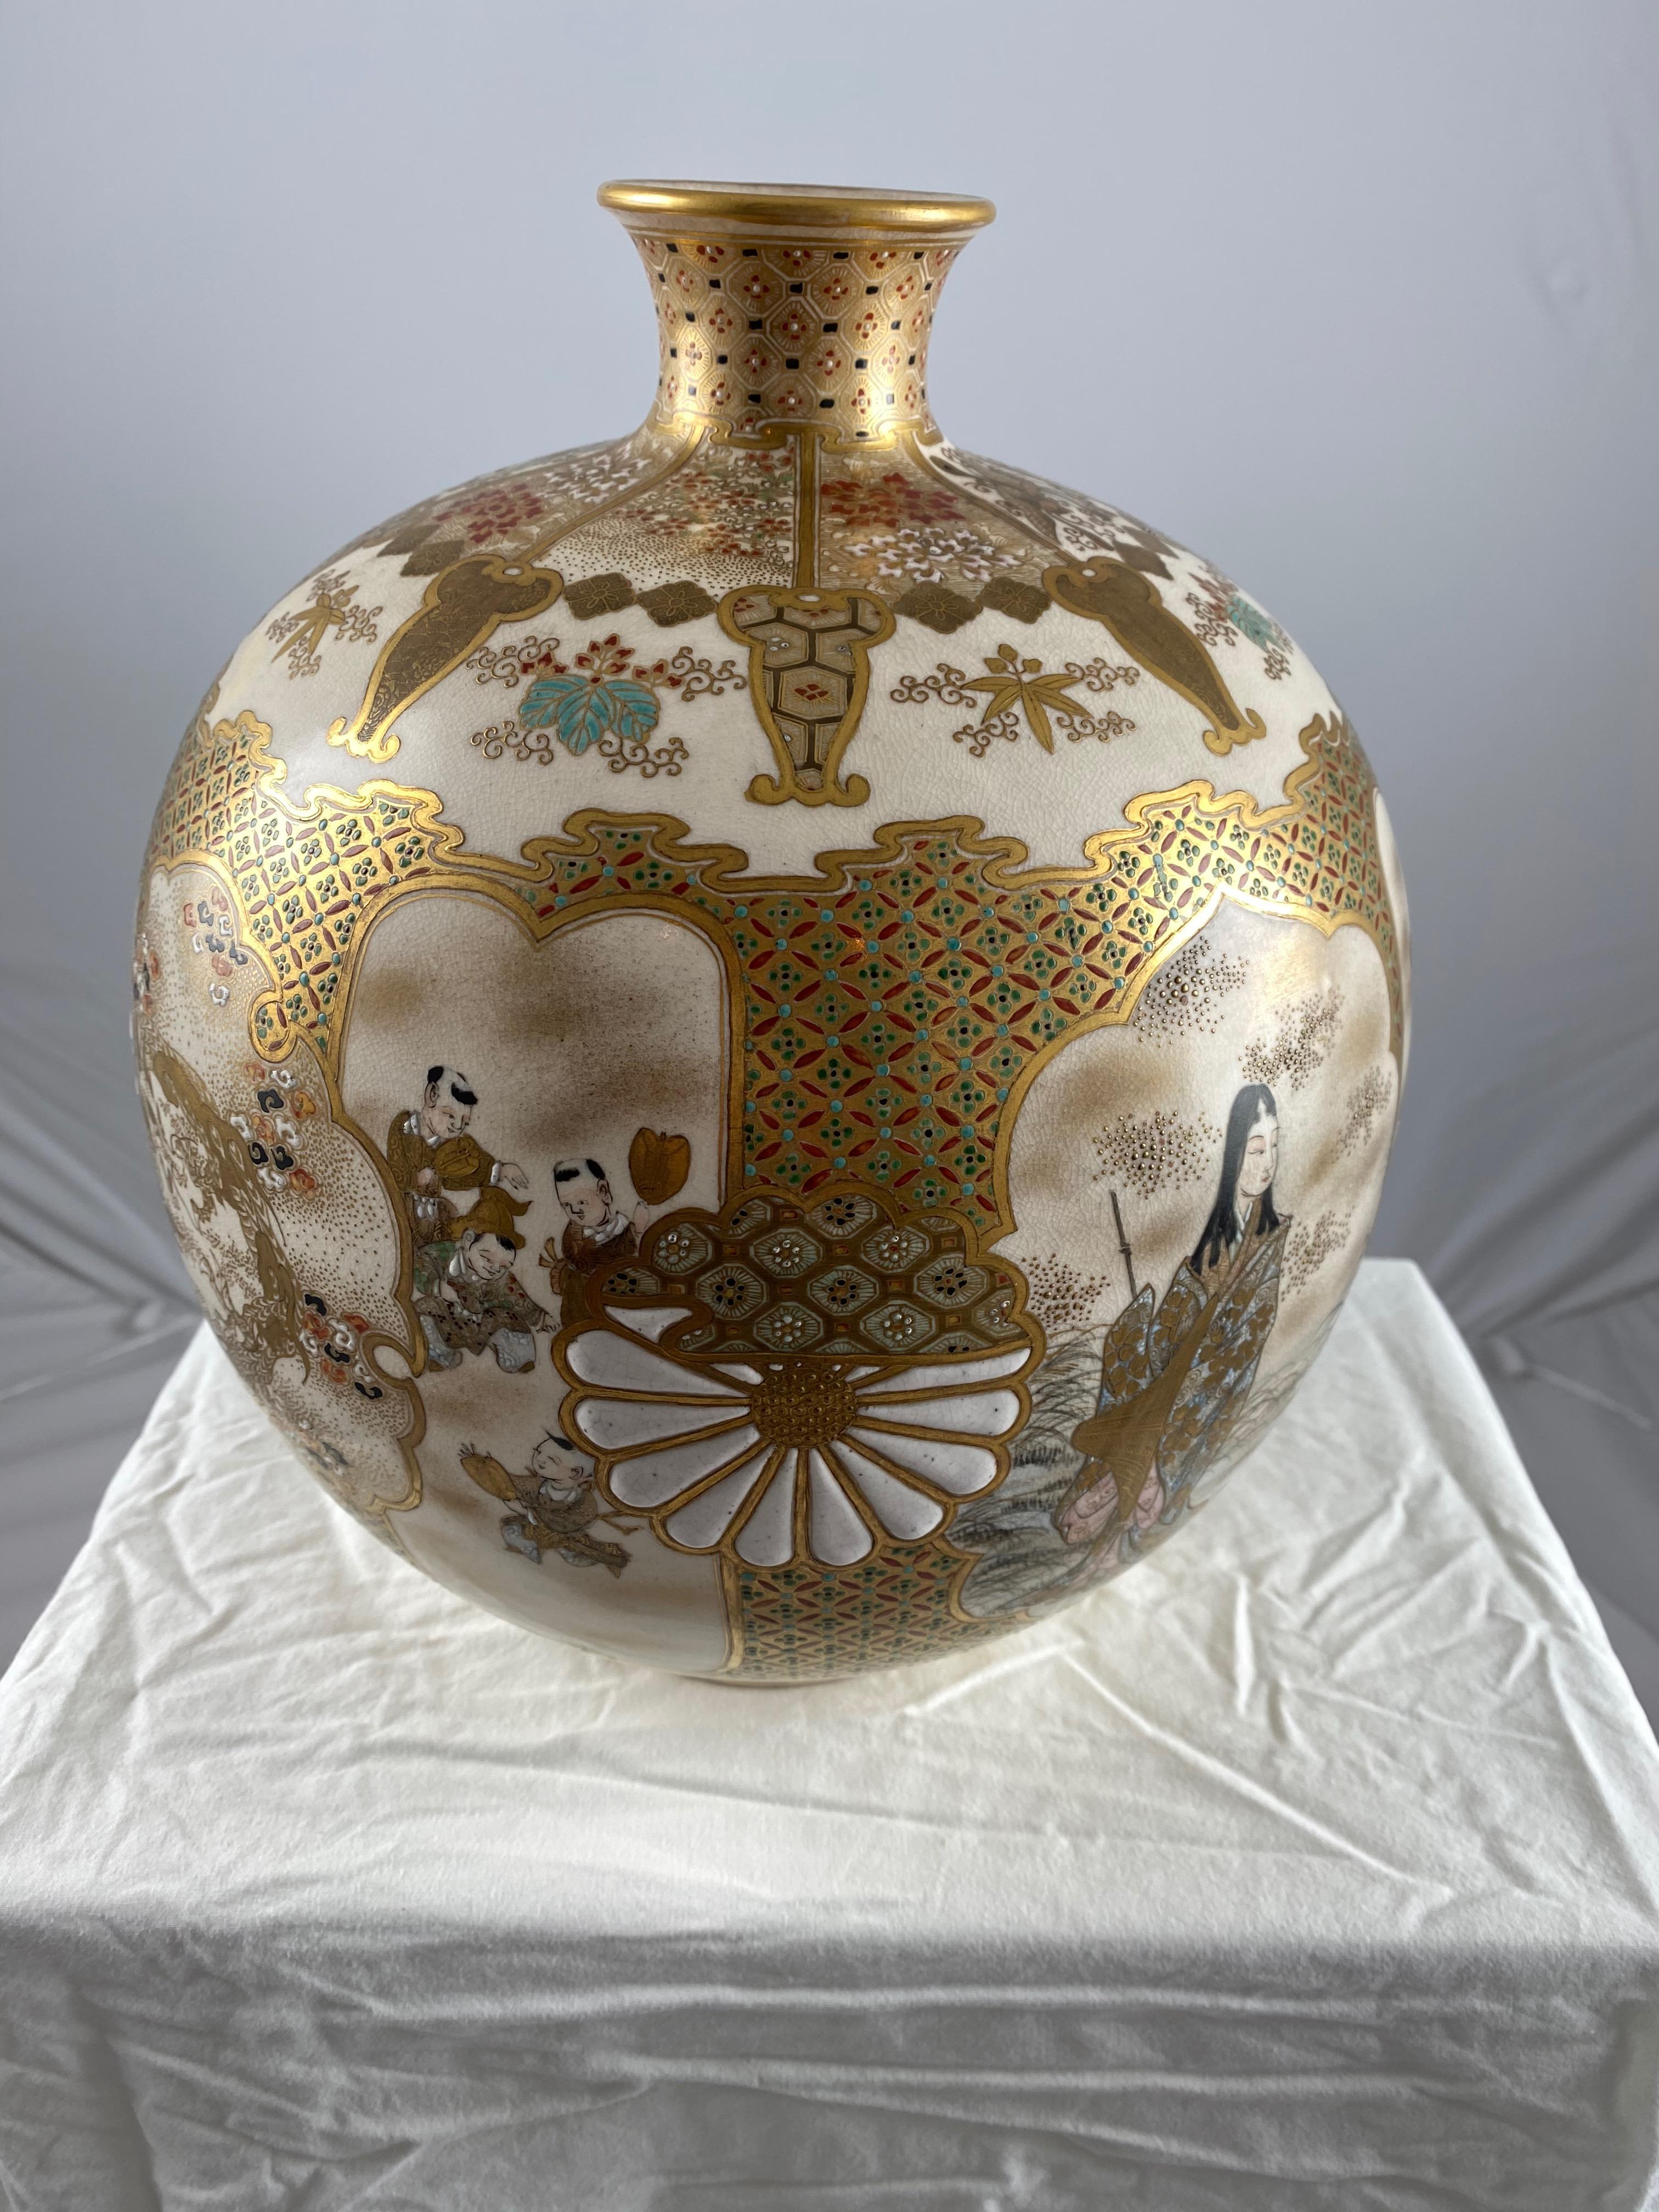 A Japanese Satsuma vase. Circular in shape and with great quality of the painting. Signed with mark at the bottom.